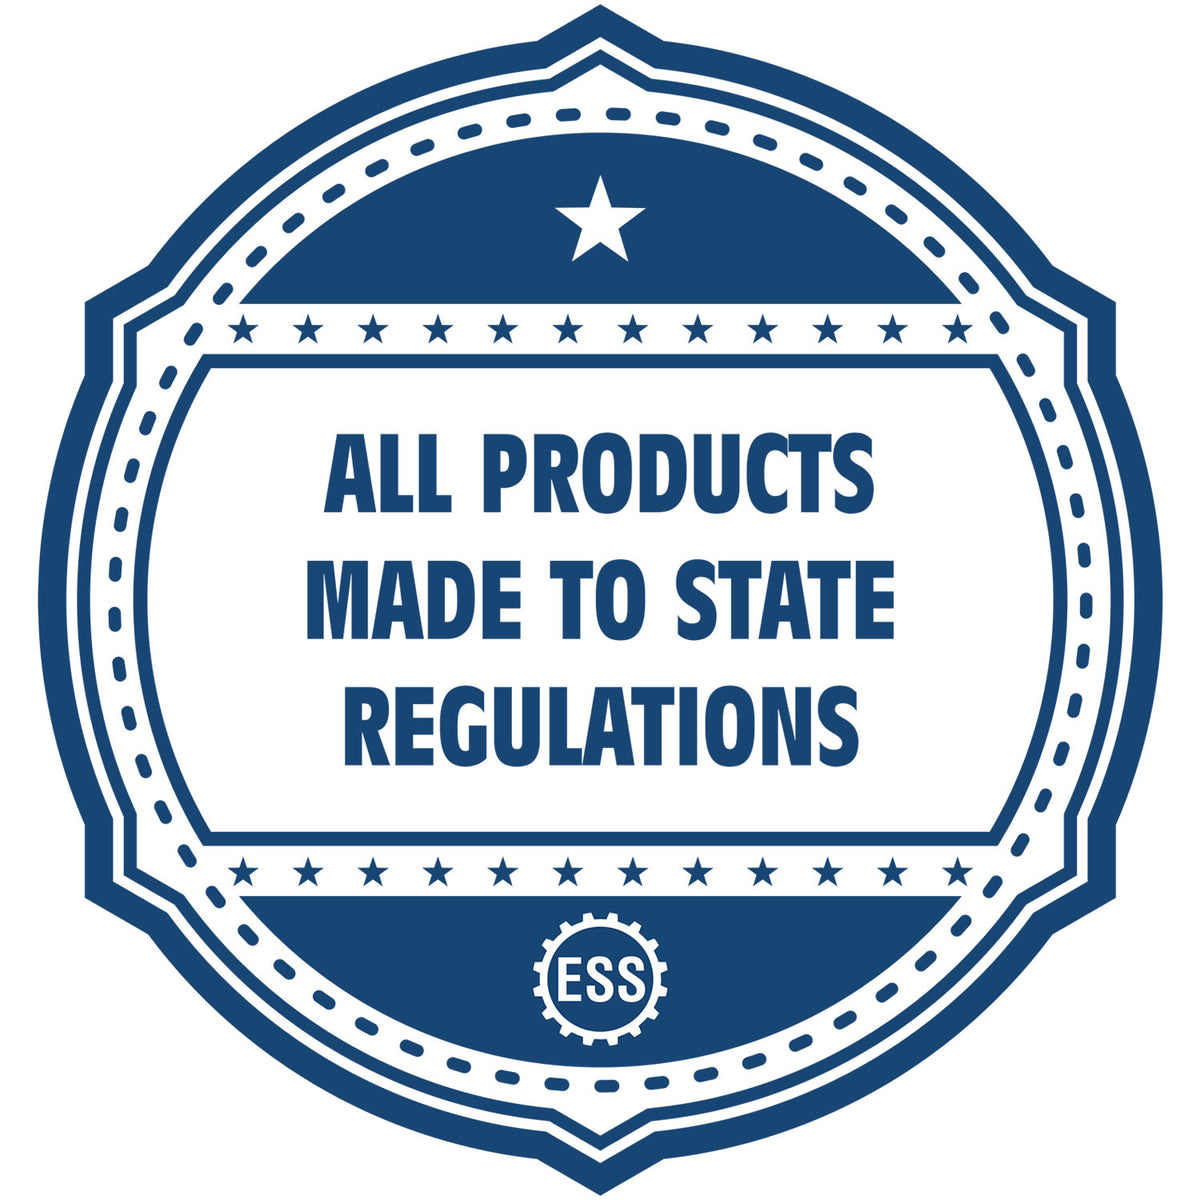 An icon or badge element for the Kansas Desk Architect Embossing Seal showing that this product is made in compliance with state regulations.